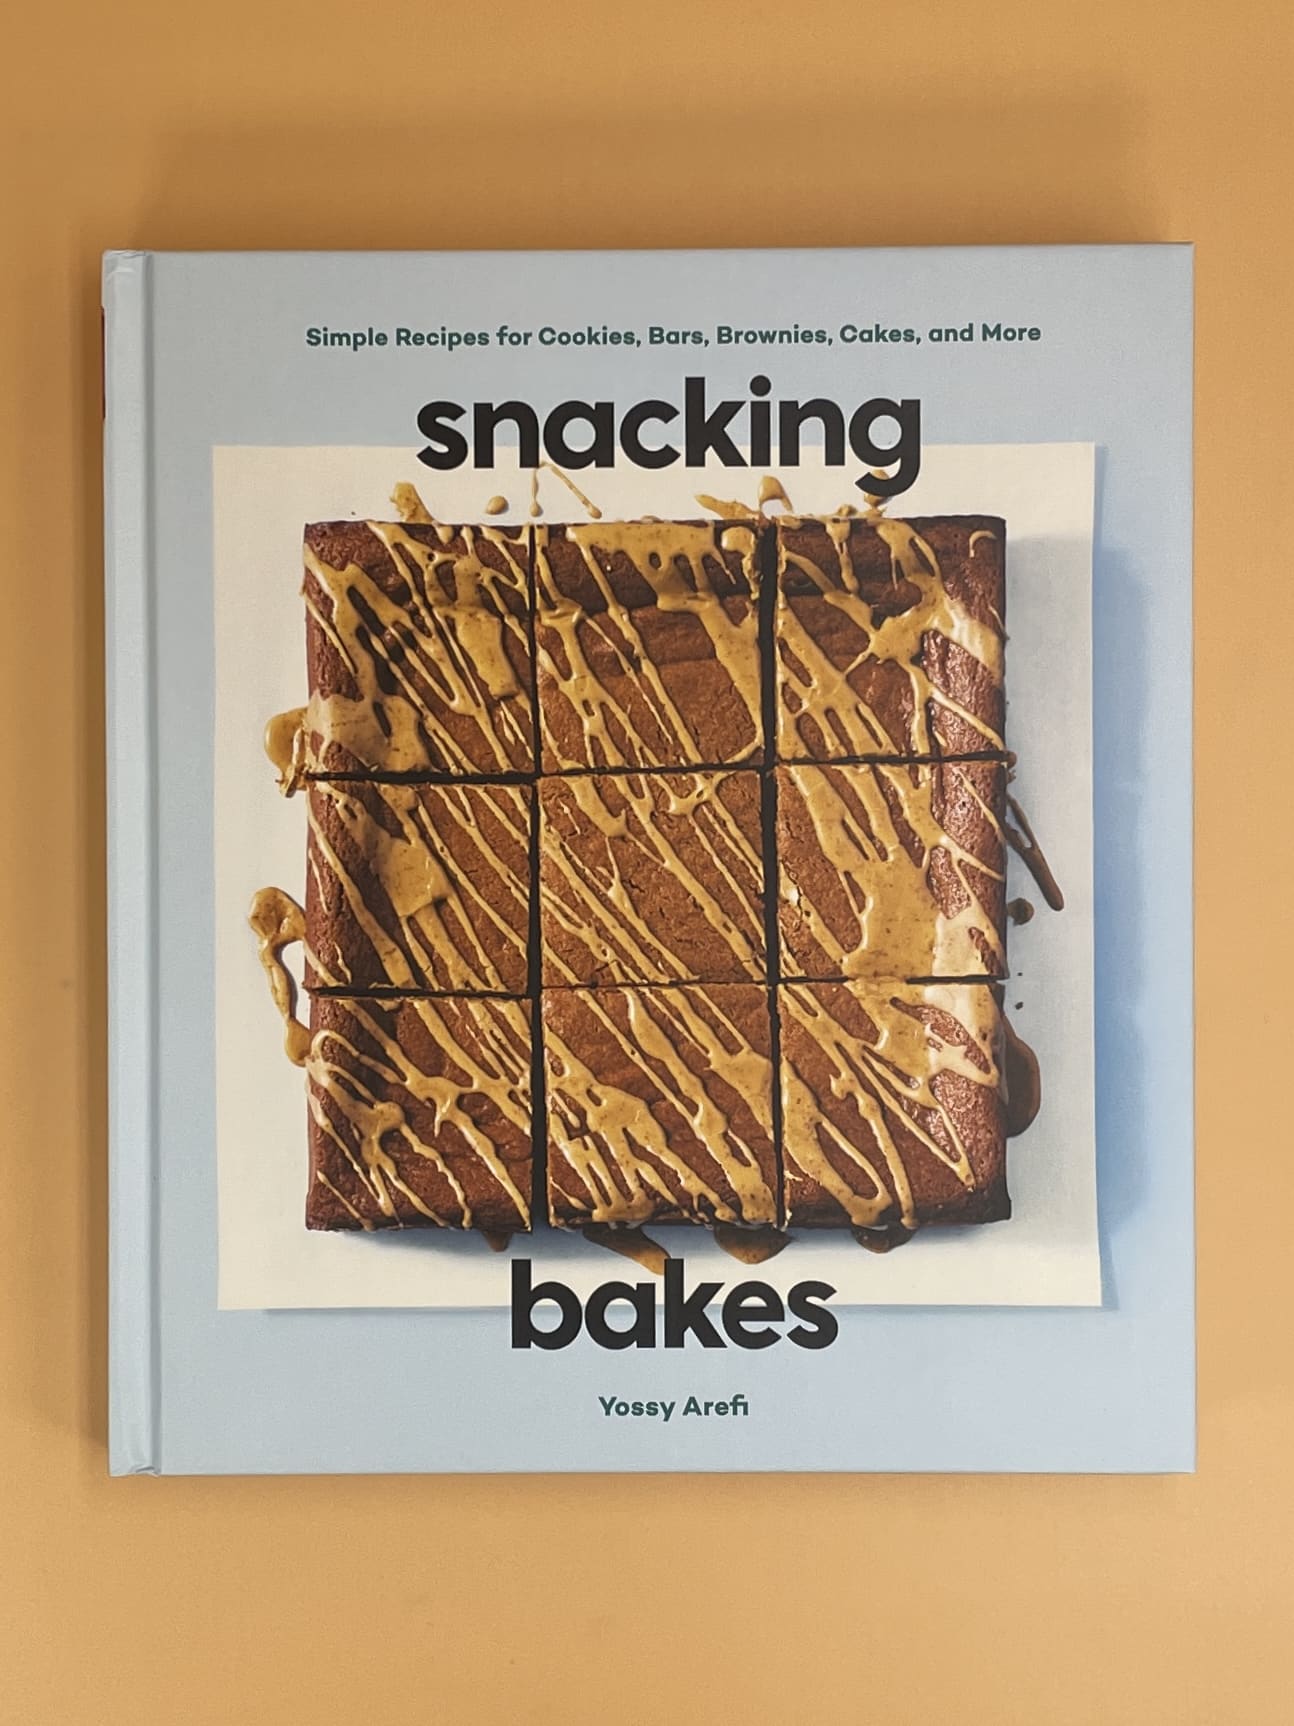 PREORDER: Snacking Bakes: Simple Recipes for Cookies, Bars, Brownies, Cakes, and More (Yossy Arefi)